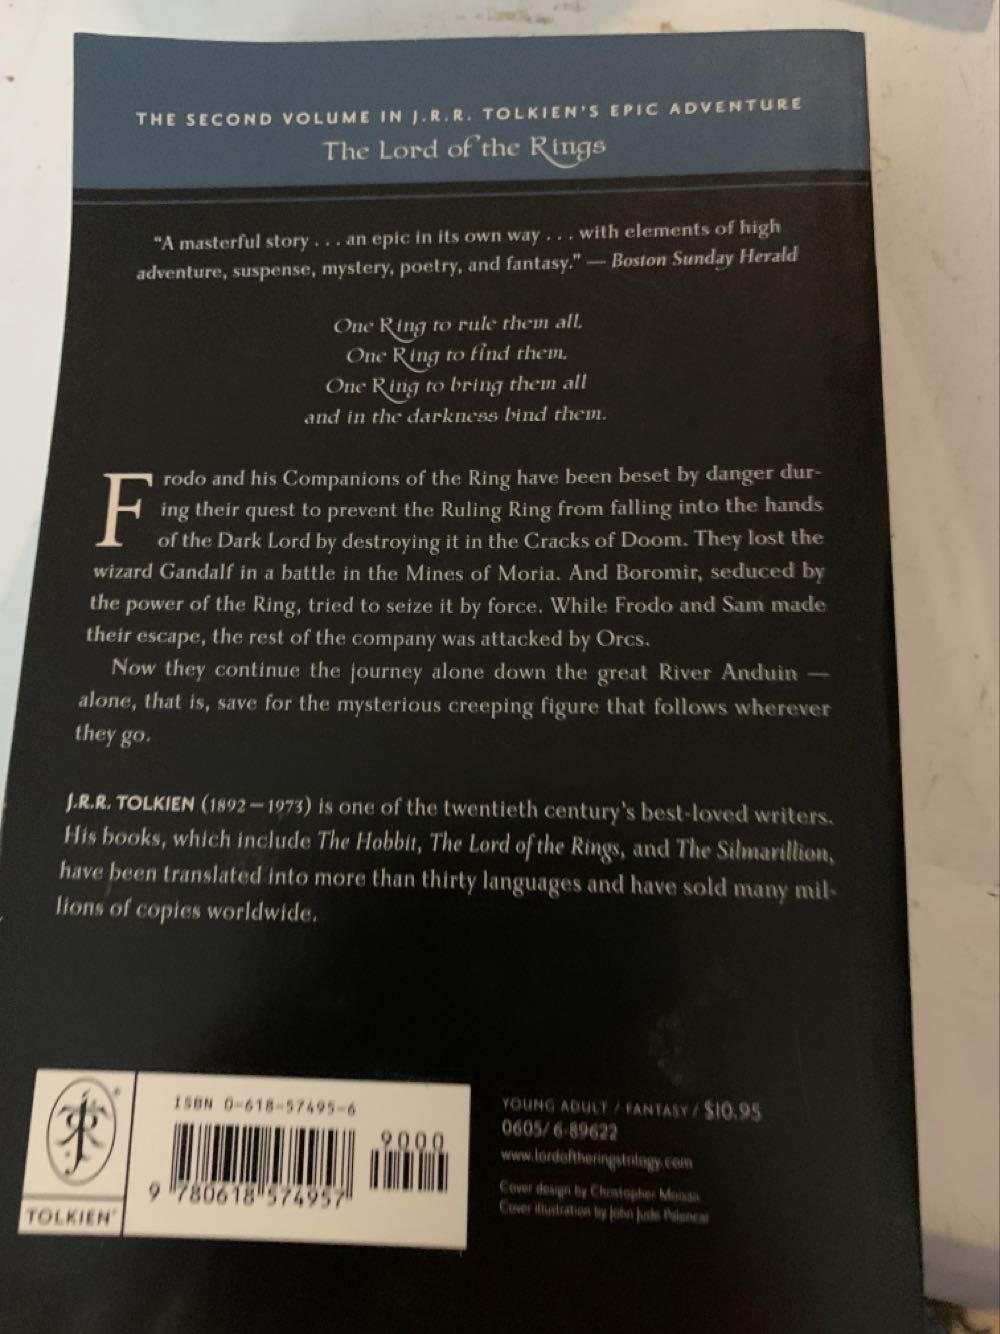 2: The Two Towers - J. R. R. Tolkien (HarperCollins UK) book collectible [Barcode 9780618574957] - Main Image 2